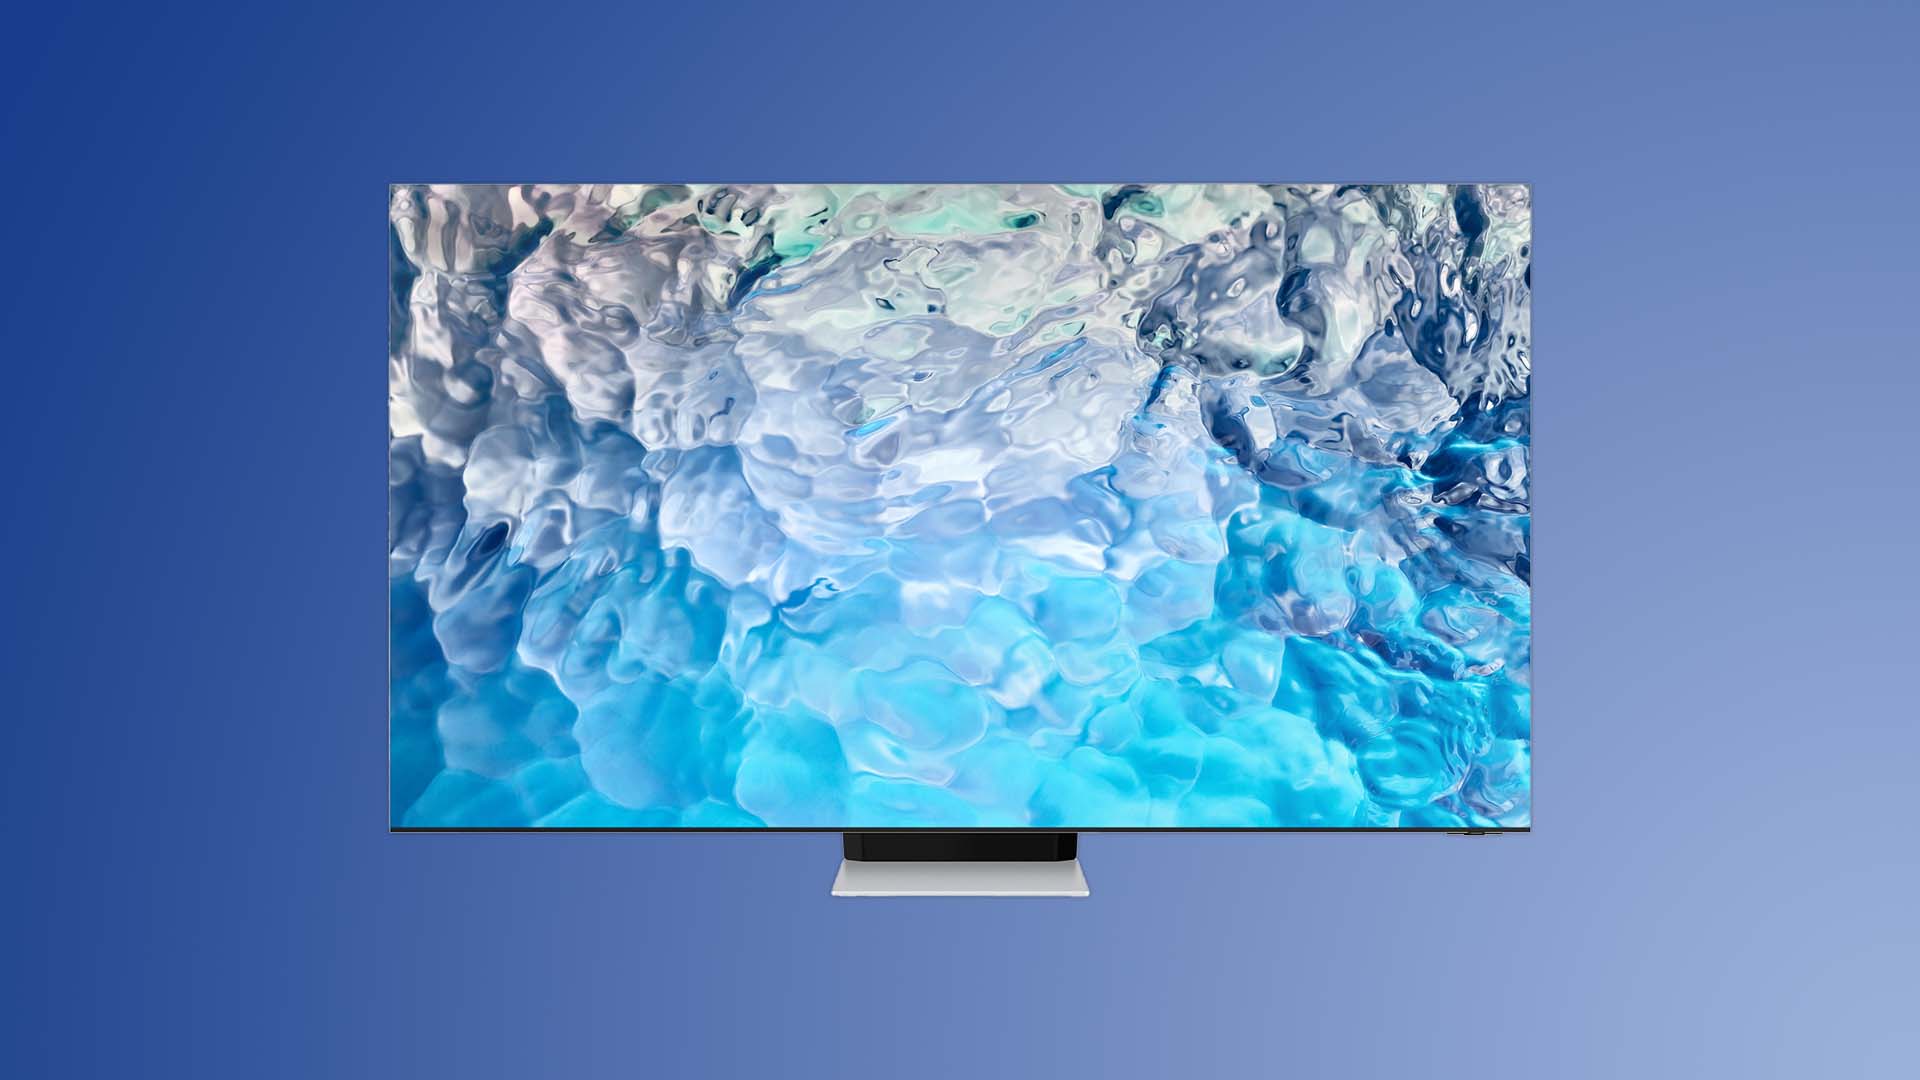 Samsung unveils new Neo QLED TVs with improved performance, new features -  SamMobile